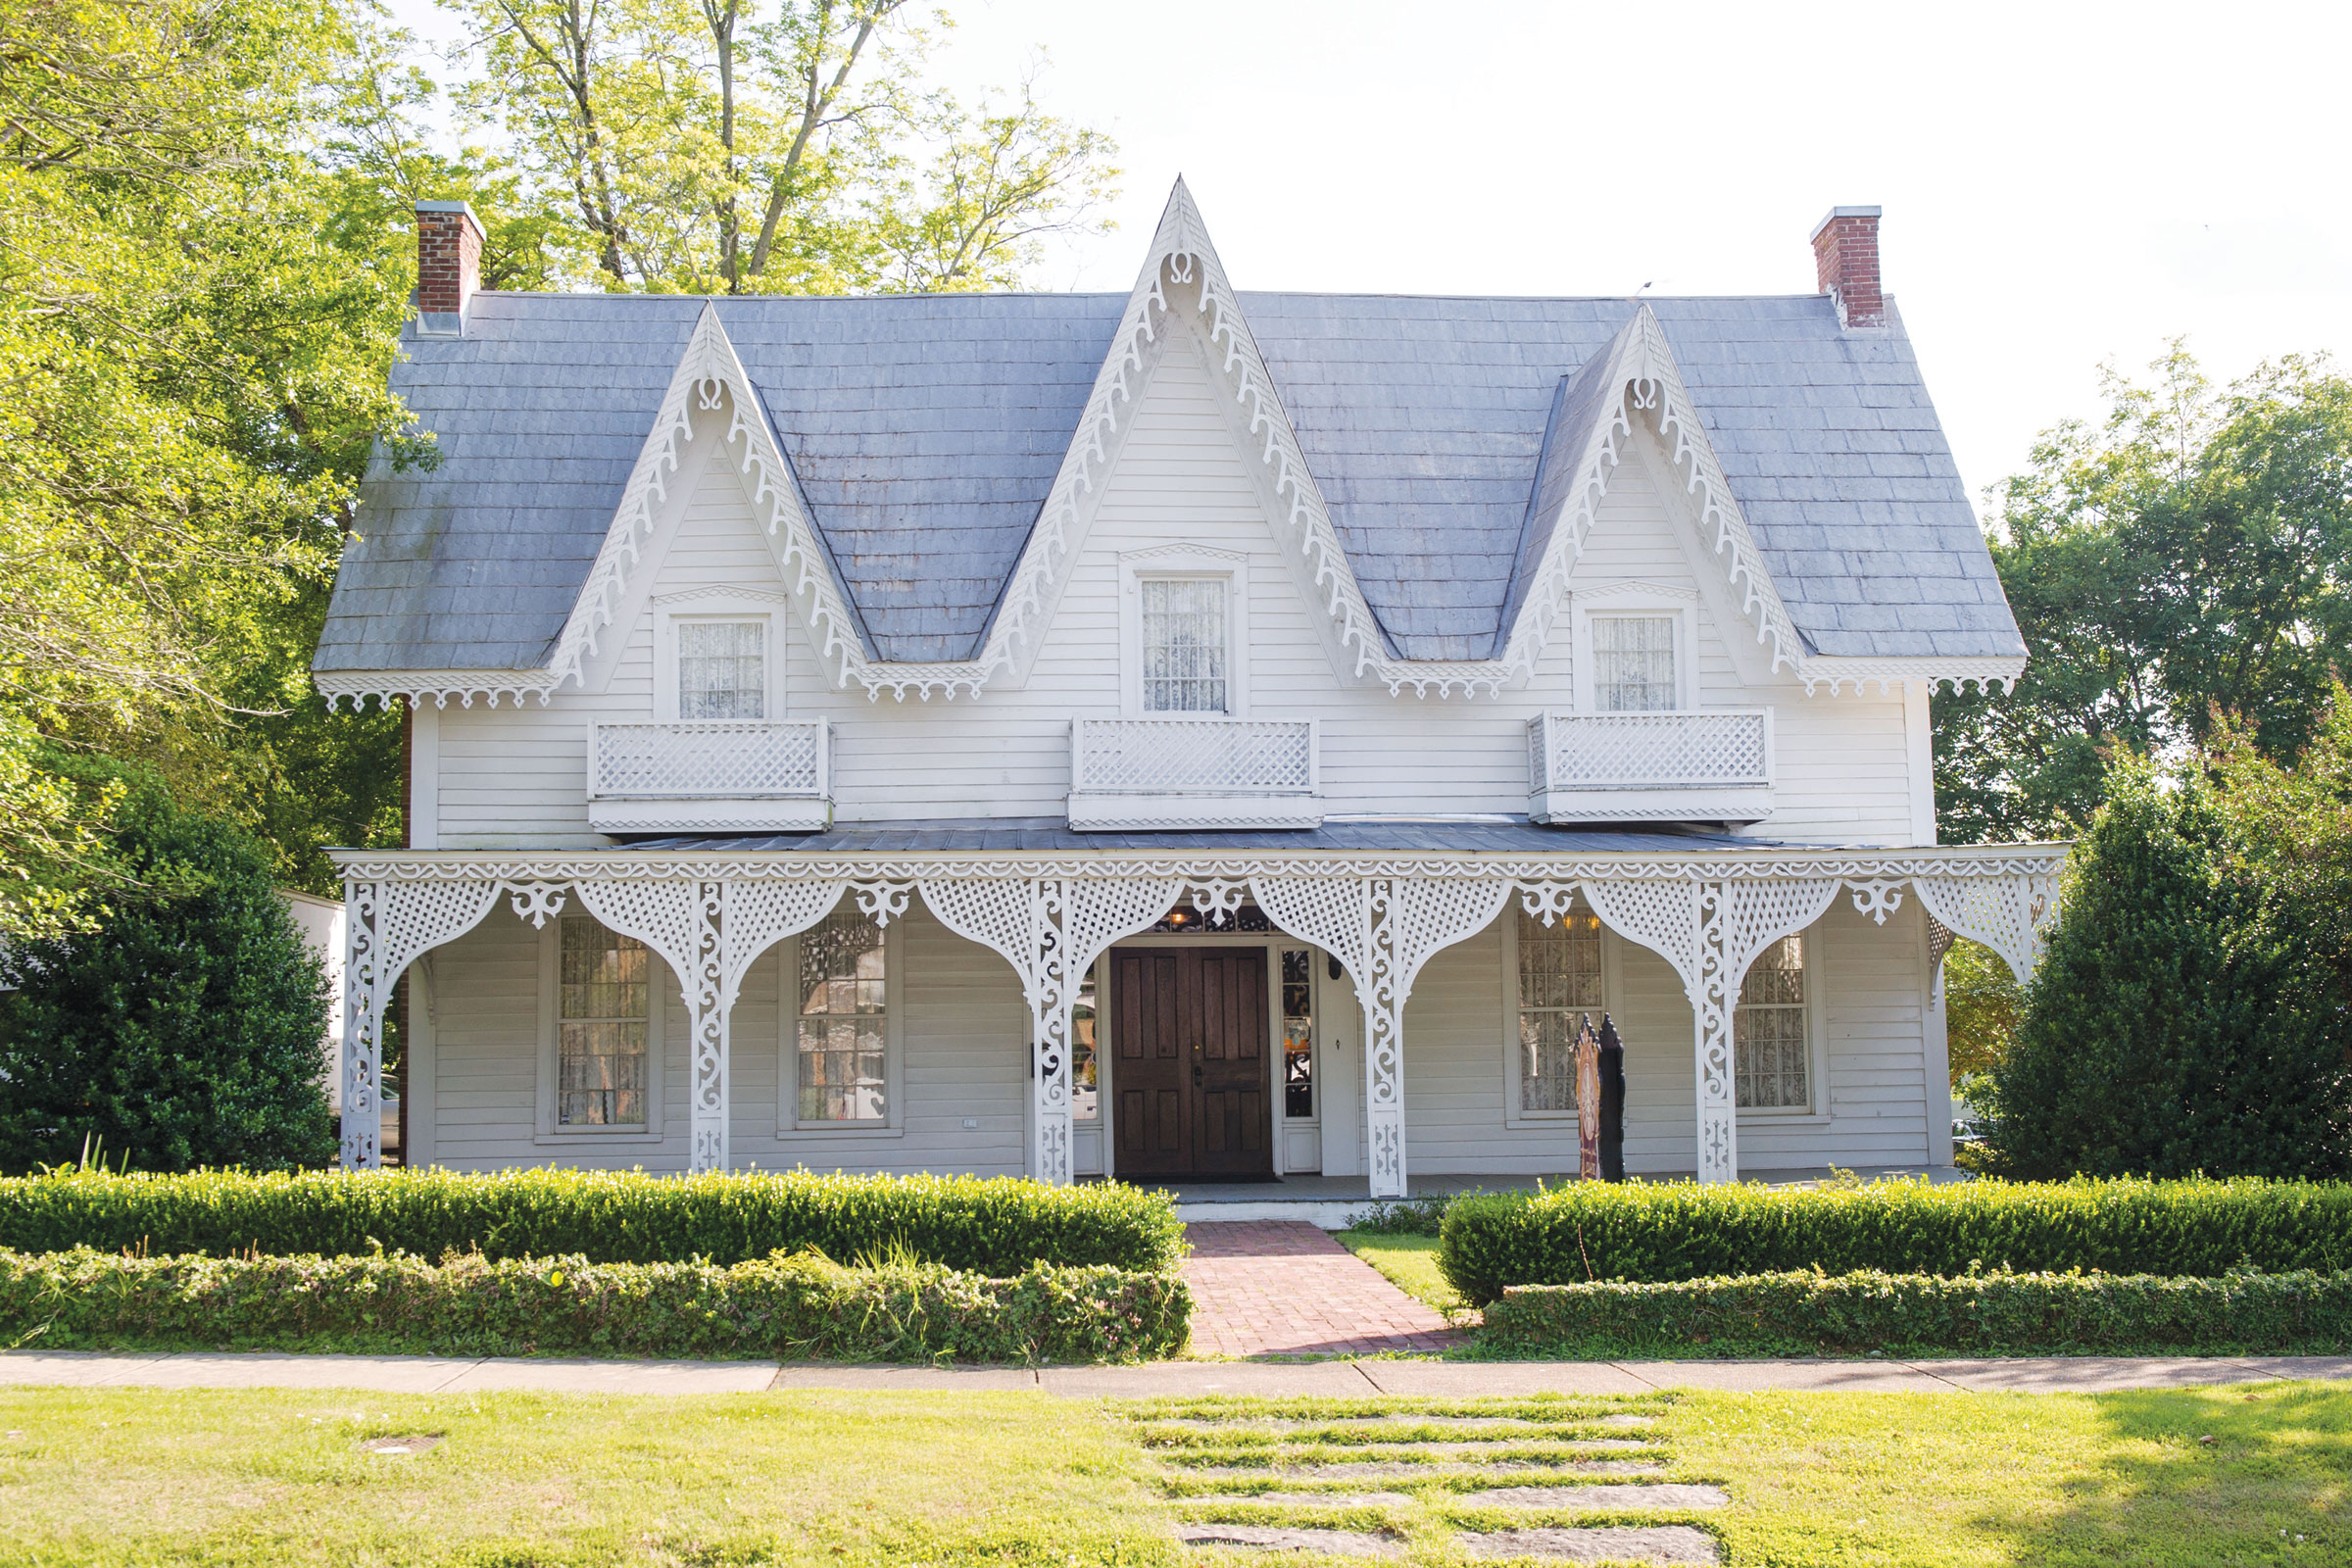 Opelika decorated with historic Carpenter Gothic houses